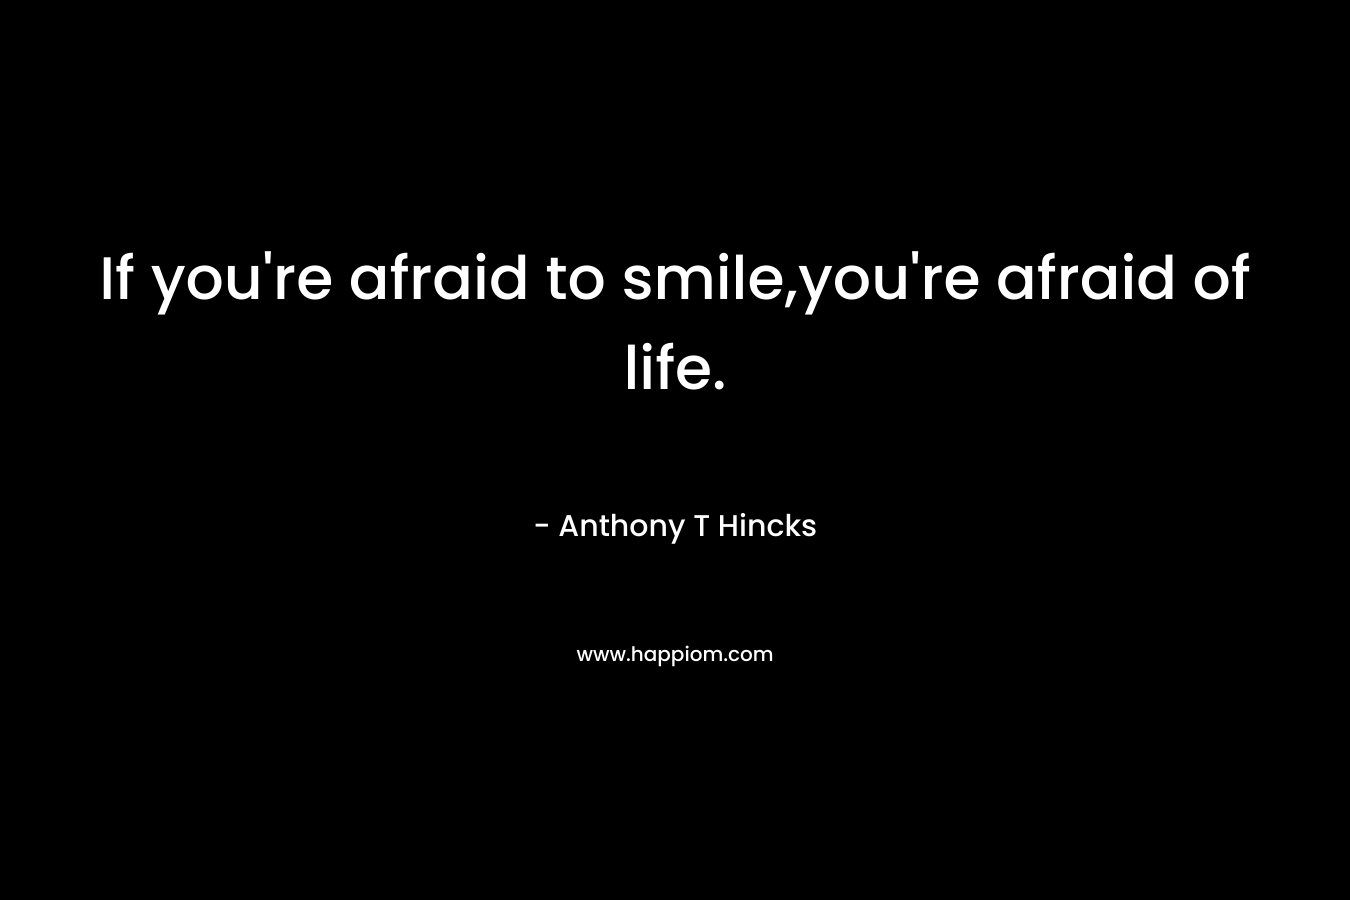 If you're afraid to smile,you're afraid of life.